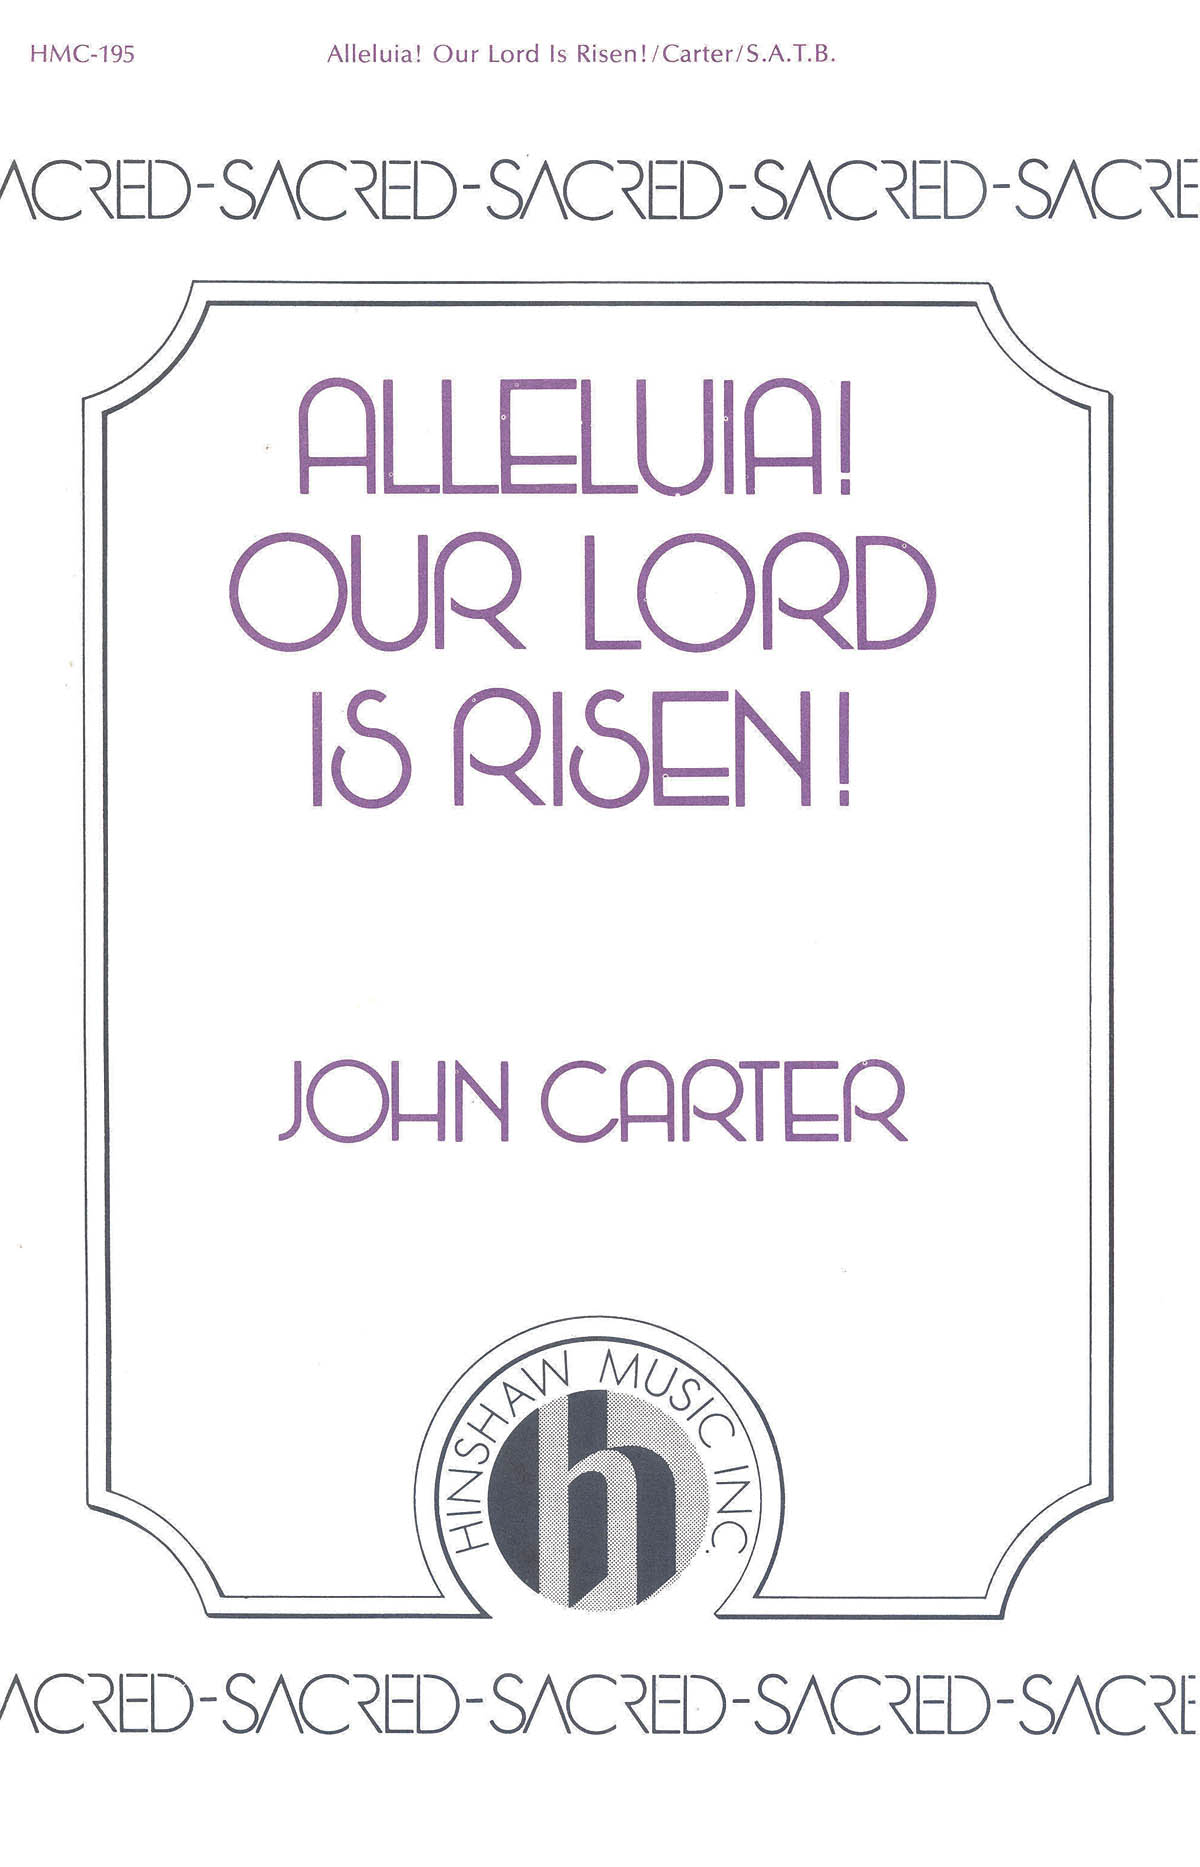 Alleluia! Our Lord Is Risen